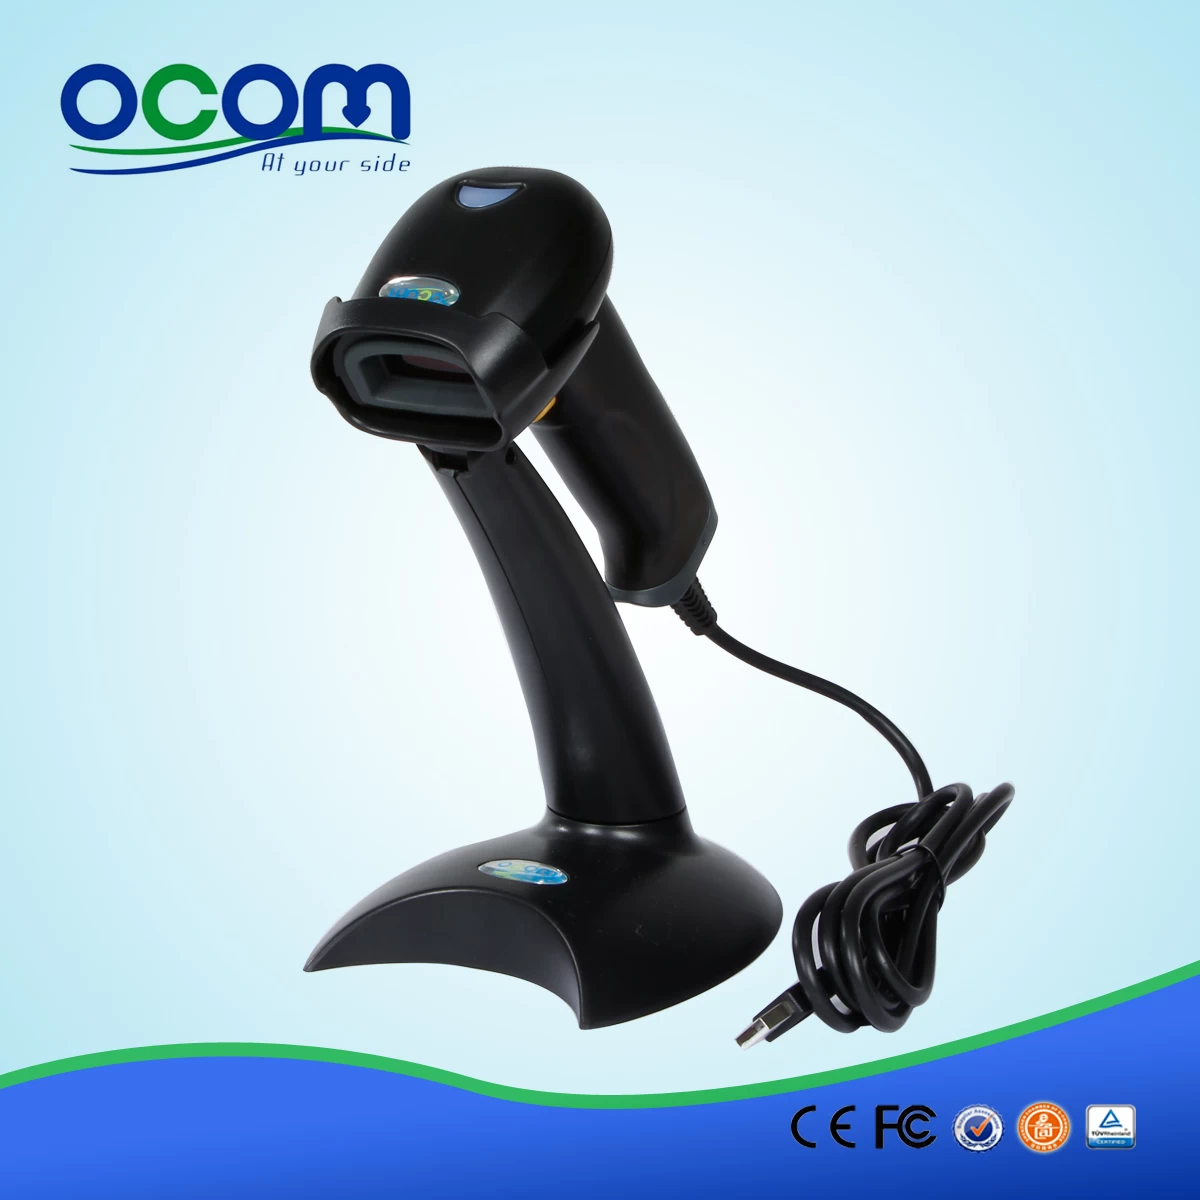 Handheld laser barcode scanner with stand